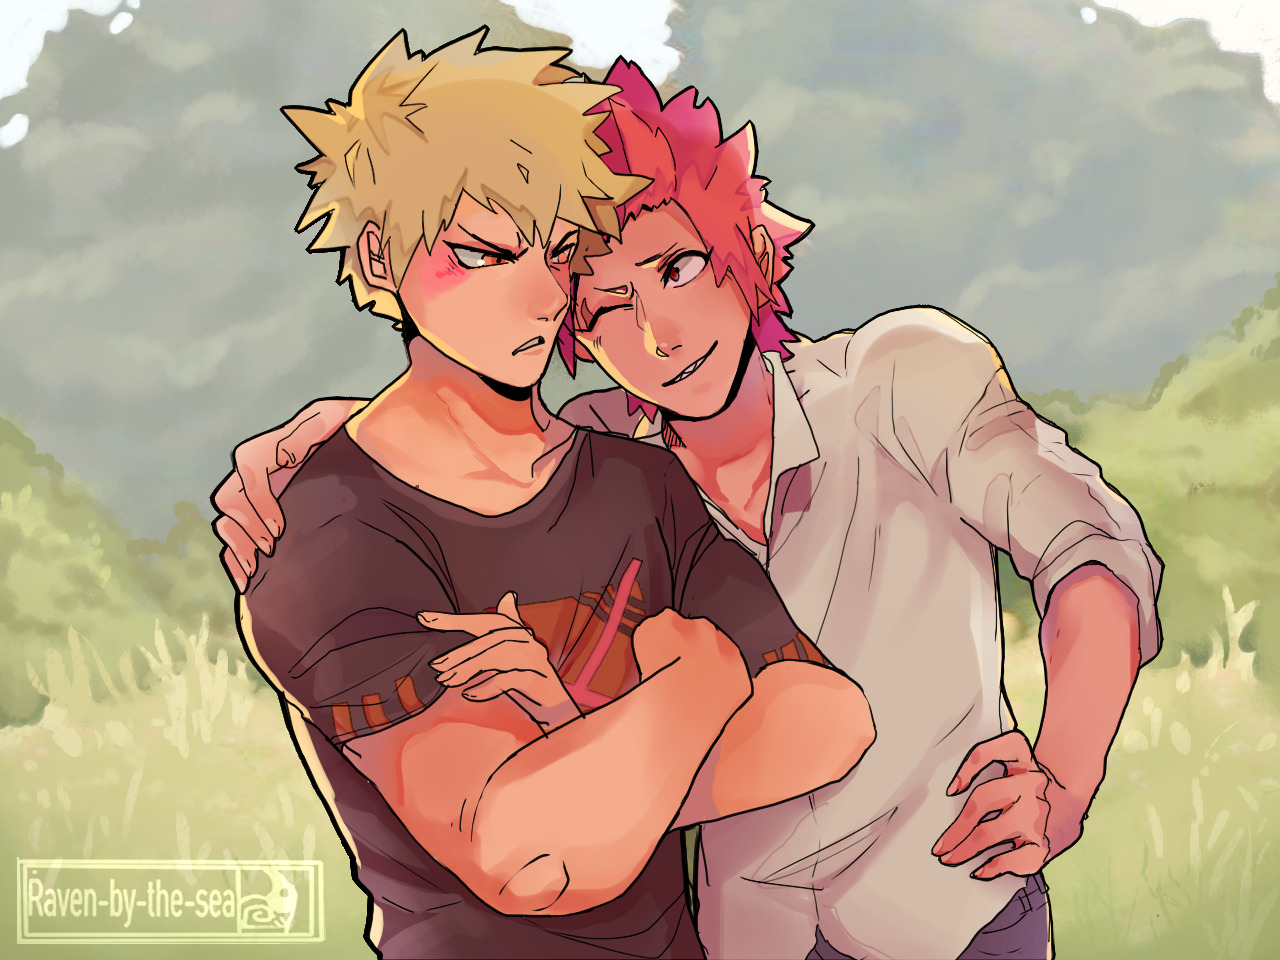 an image of Kirishima with an arm wrapped around Bakugou. Kirishima is smiling brightly while Bakugou is looking slightly flustered. The background is a series of trees and bushes.